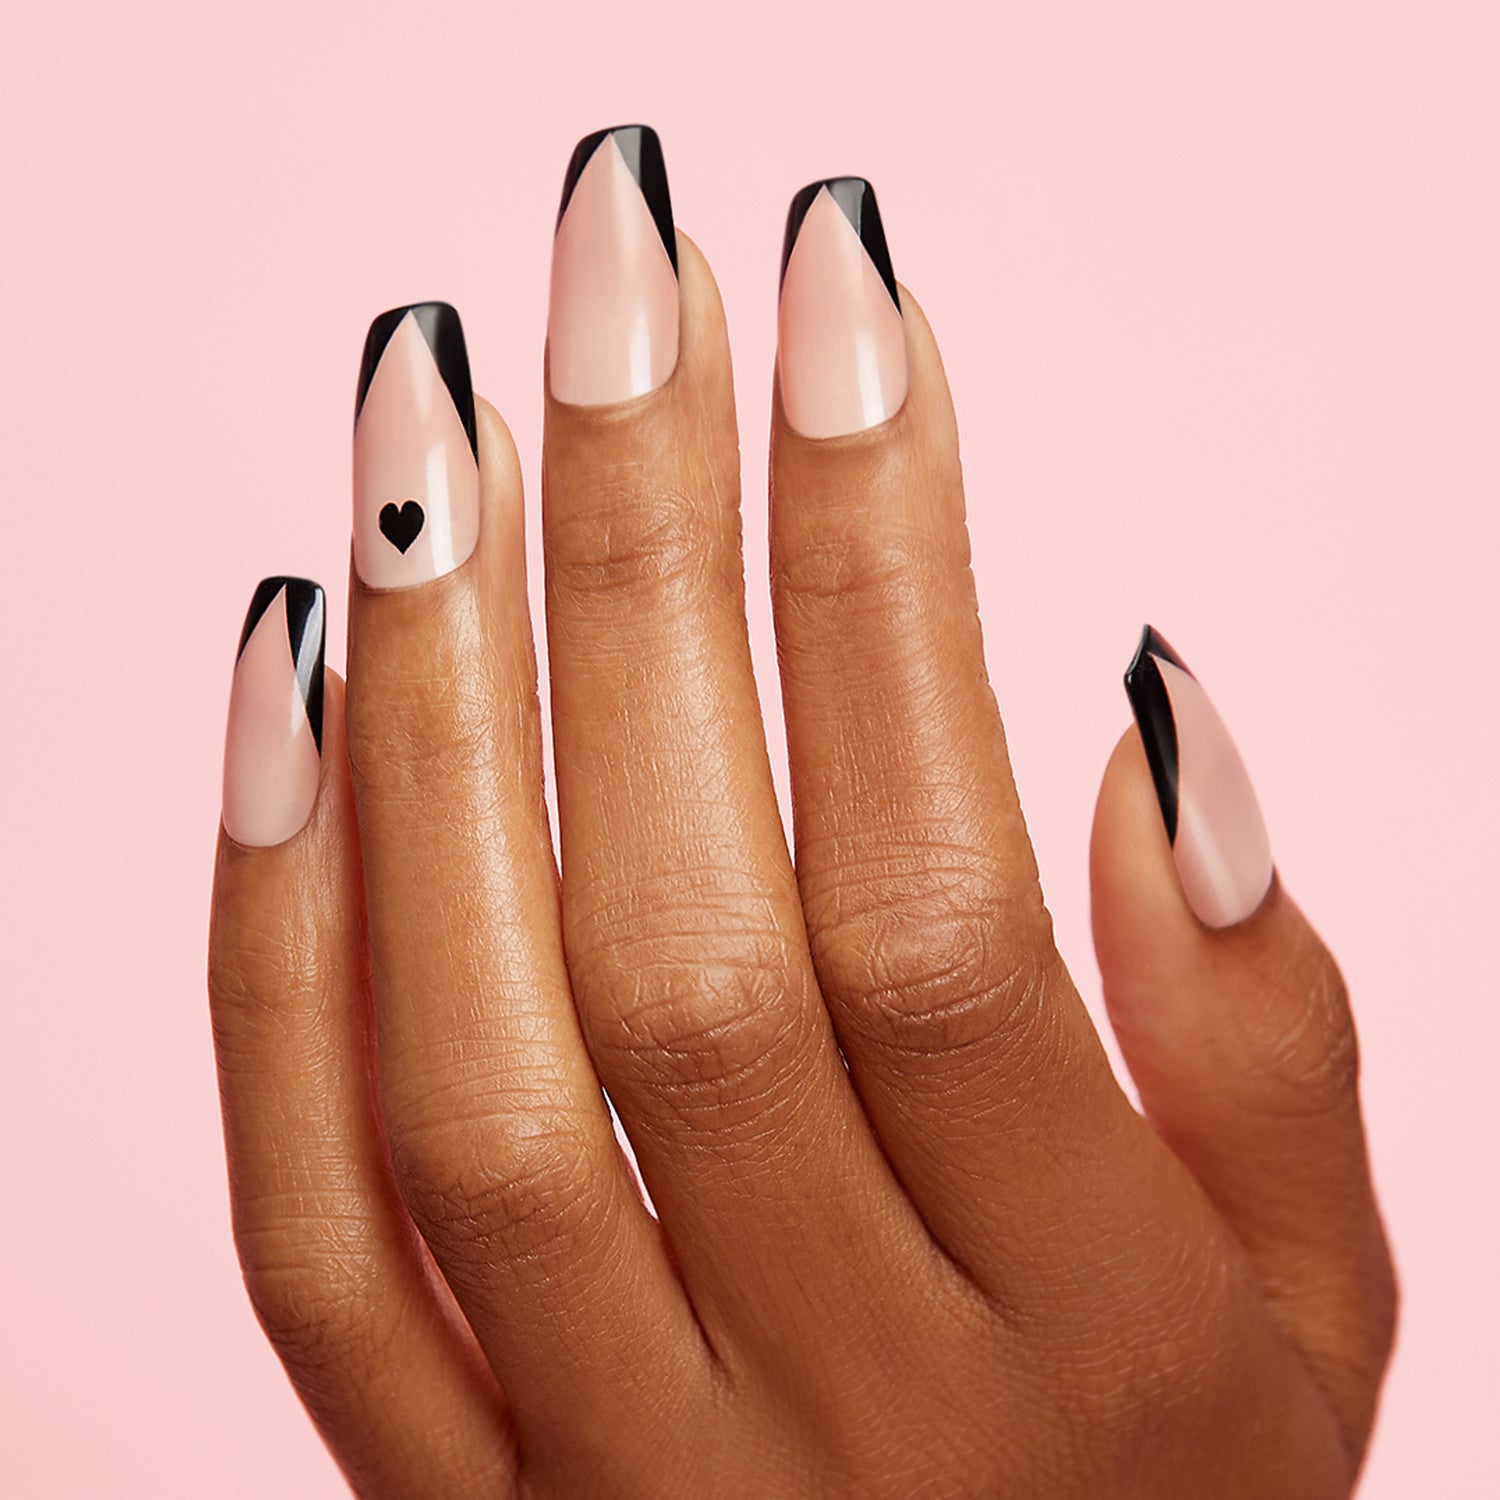 Lover boys love picking out your next mani. Long length, square shape, glossy finish. Sheer nude glue-on gel nails featyuring black hearts and black chevron french tips.